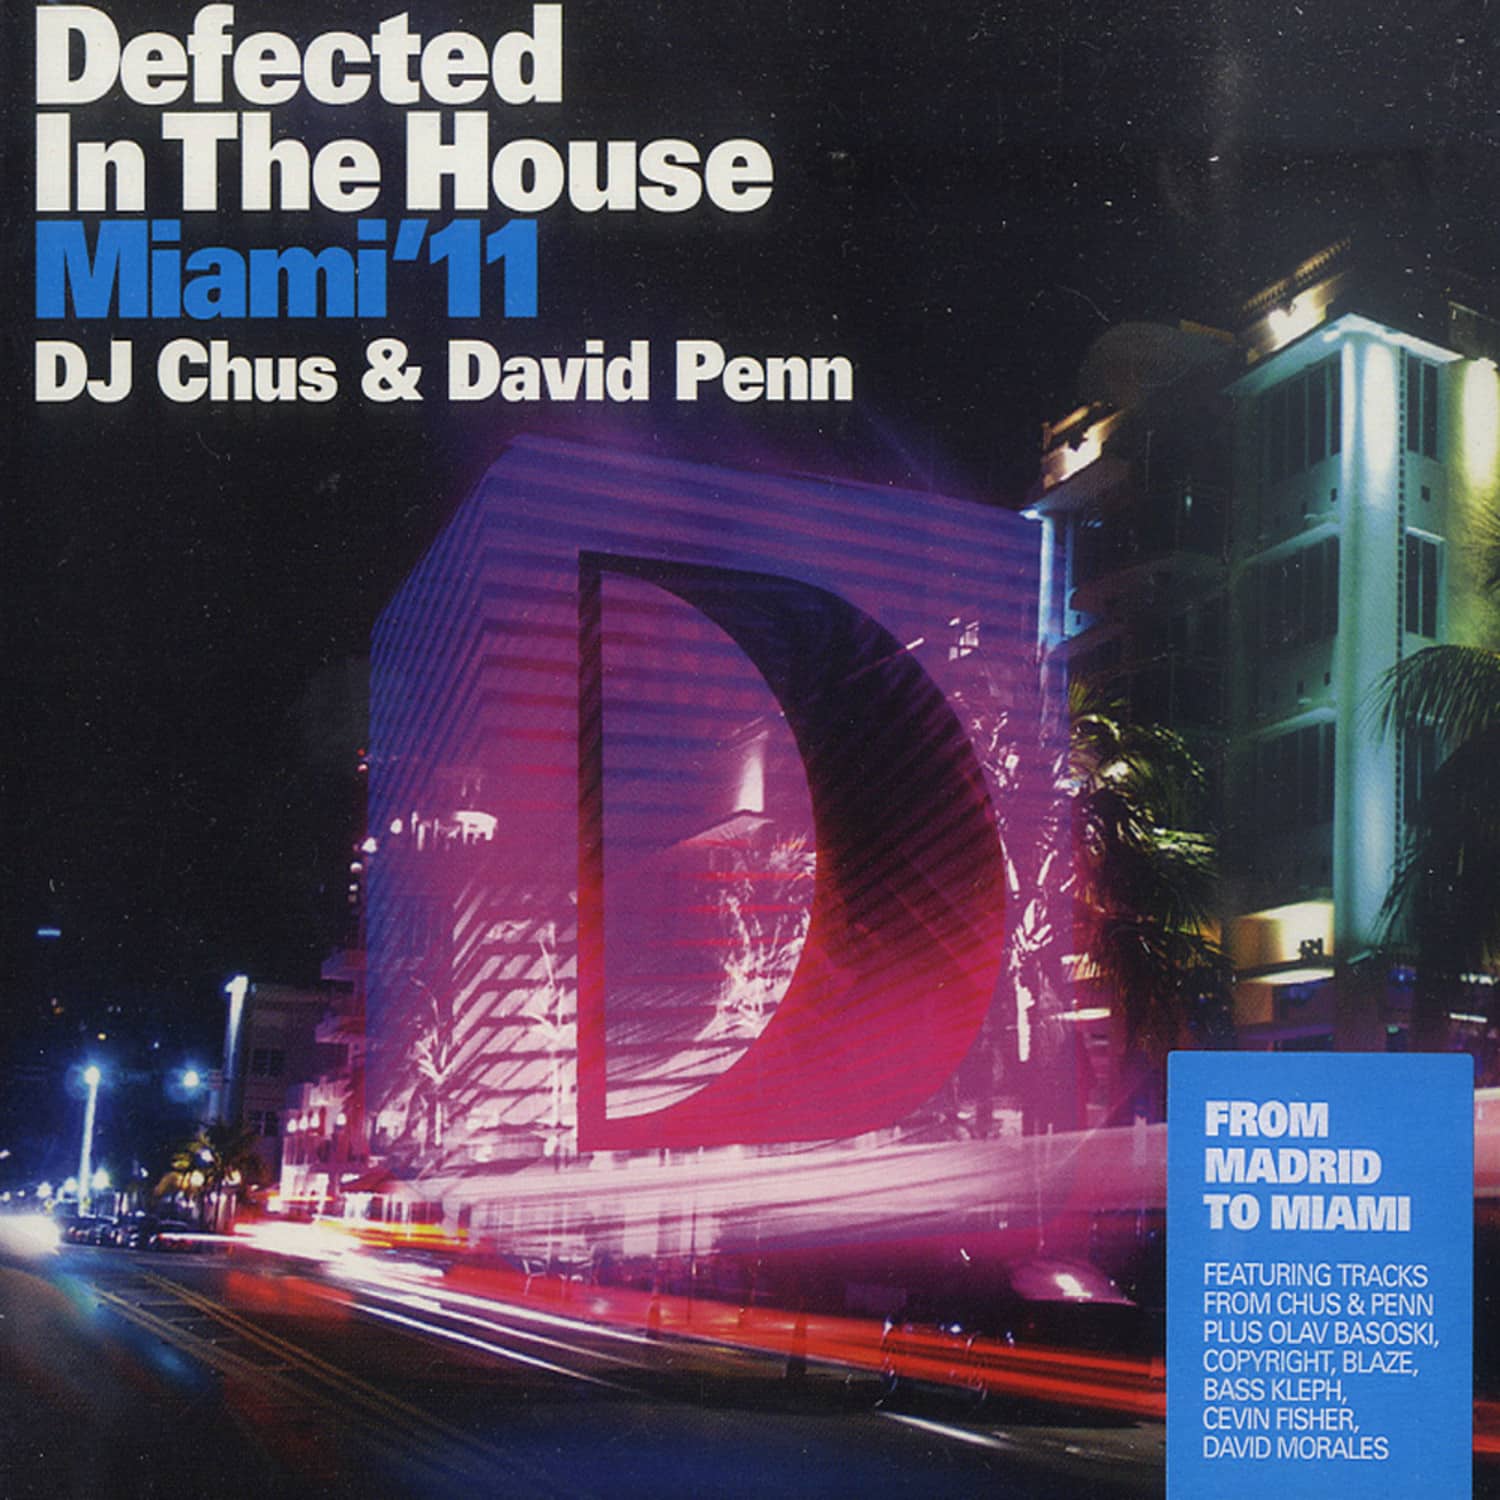 V/A mixed by DJ Chus & David Penn - DEFECTED IN THE HOUSE MIAMI 11 